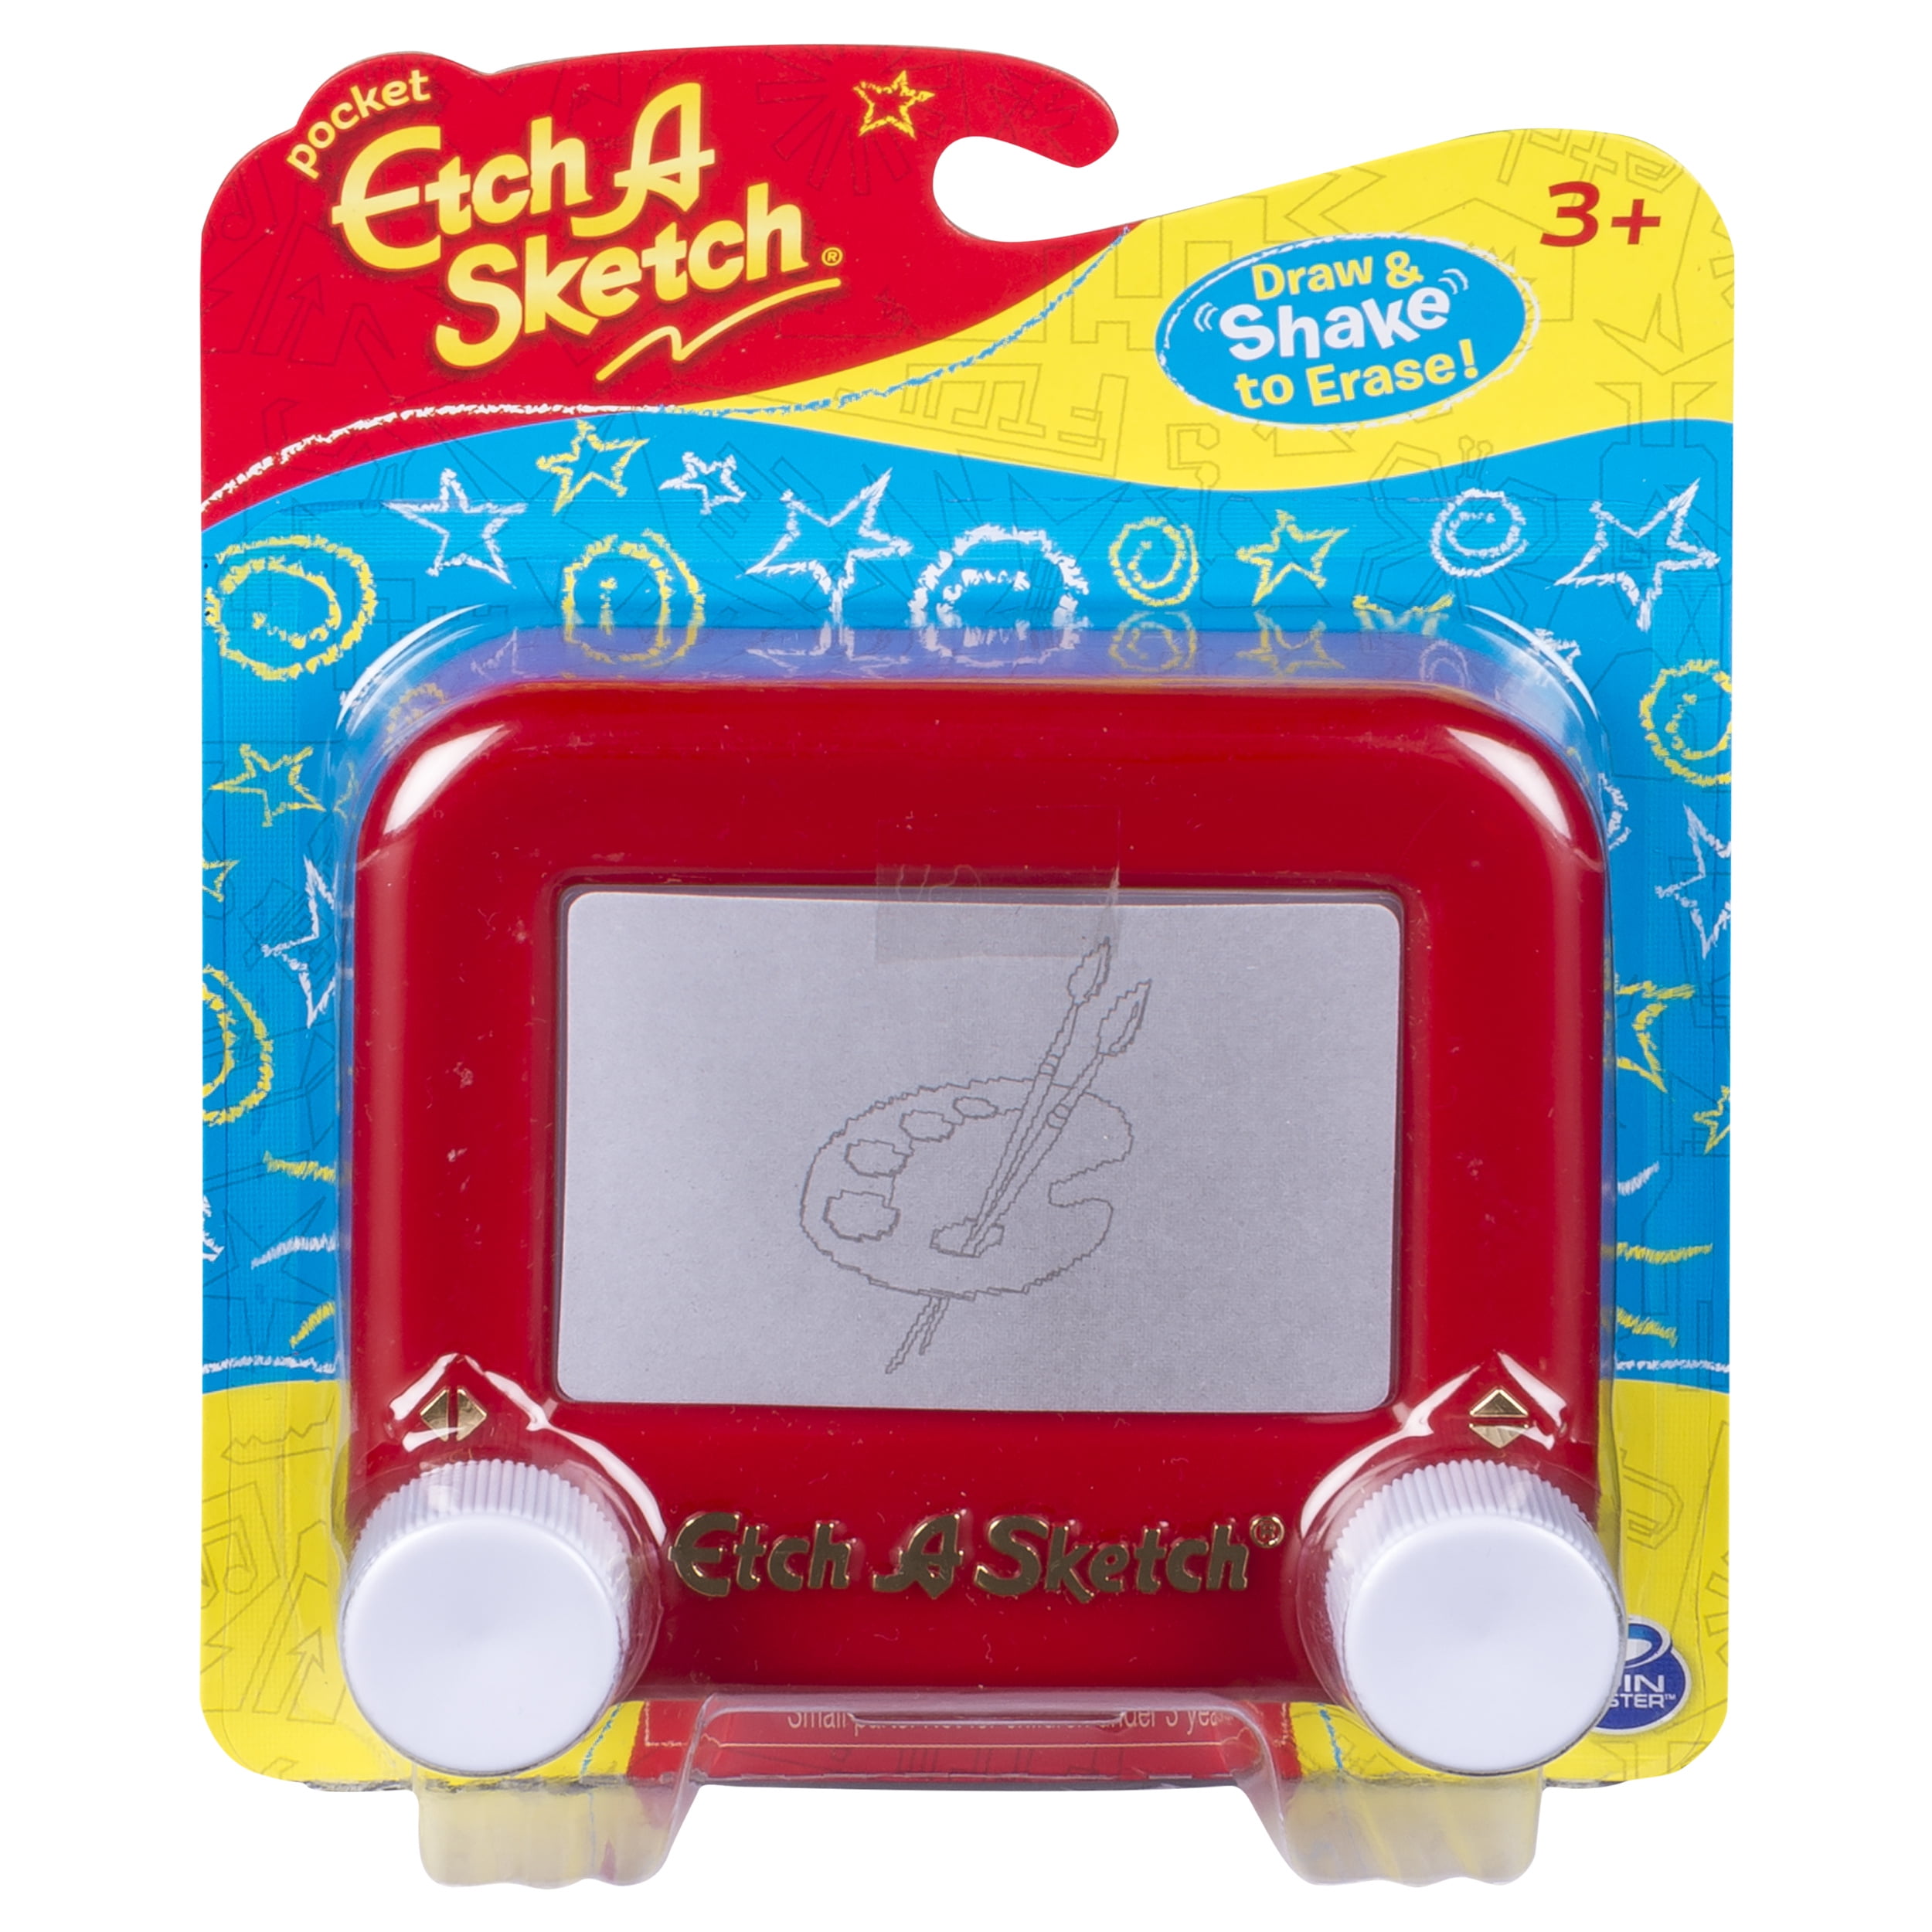 Toysmith 9928 Classic Etch A Sketch Magic Screen for sale online 